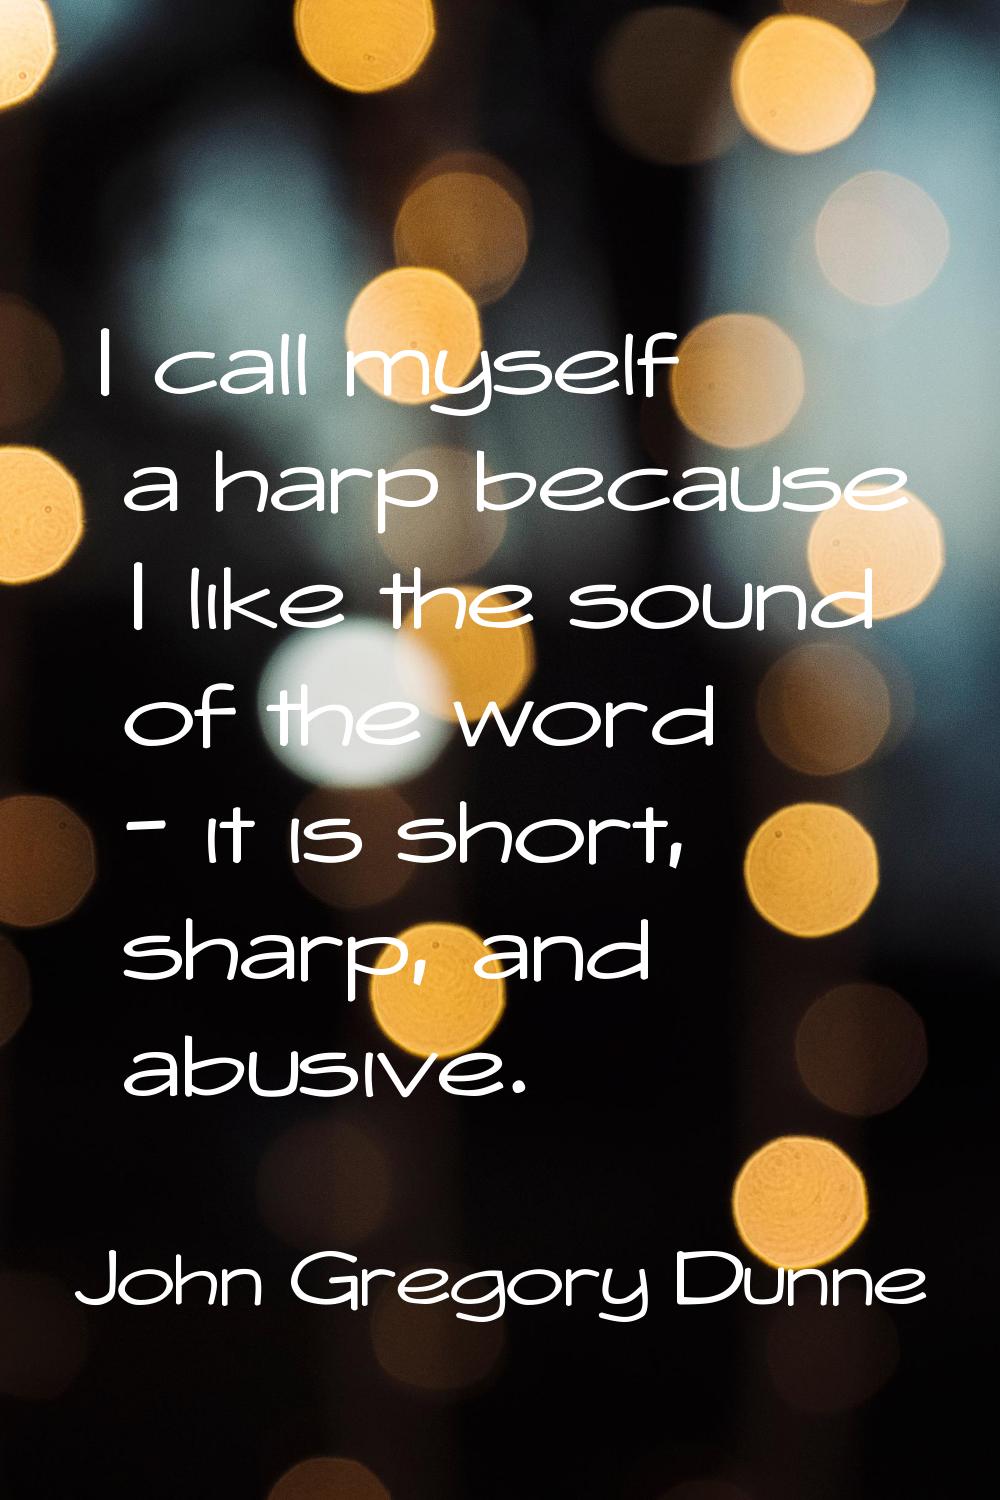 I call myself a harp because I like the sound of the word - it is short, sharp, and abusive.